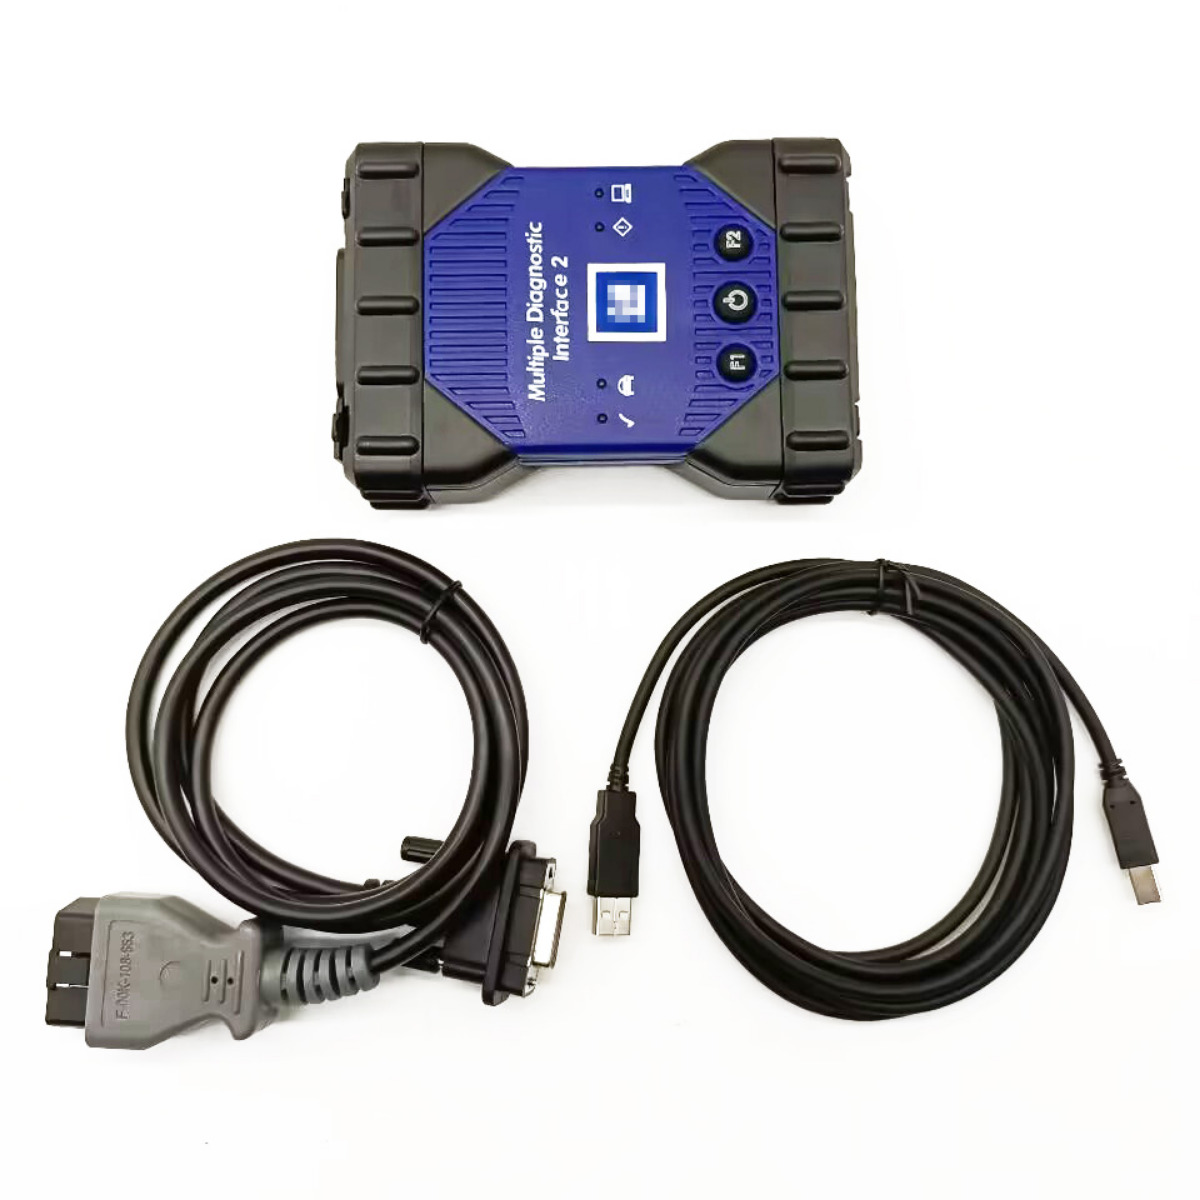 MDI 2 For Multiple Diagnostic Interface wifi version With DLC Cable USB Cable